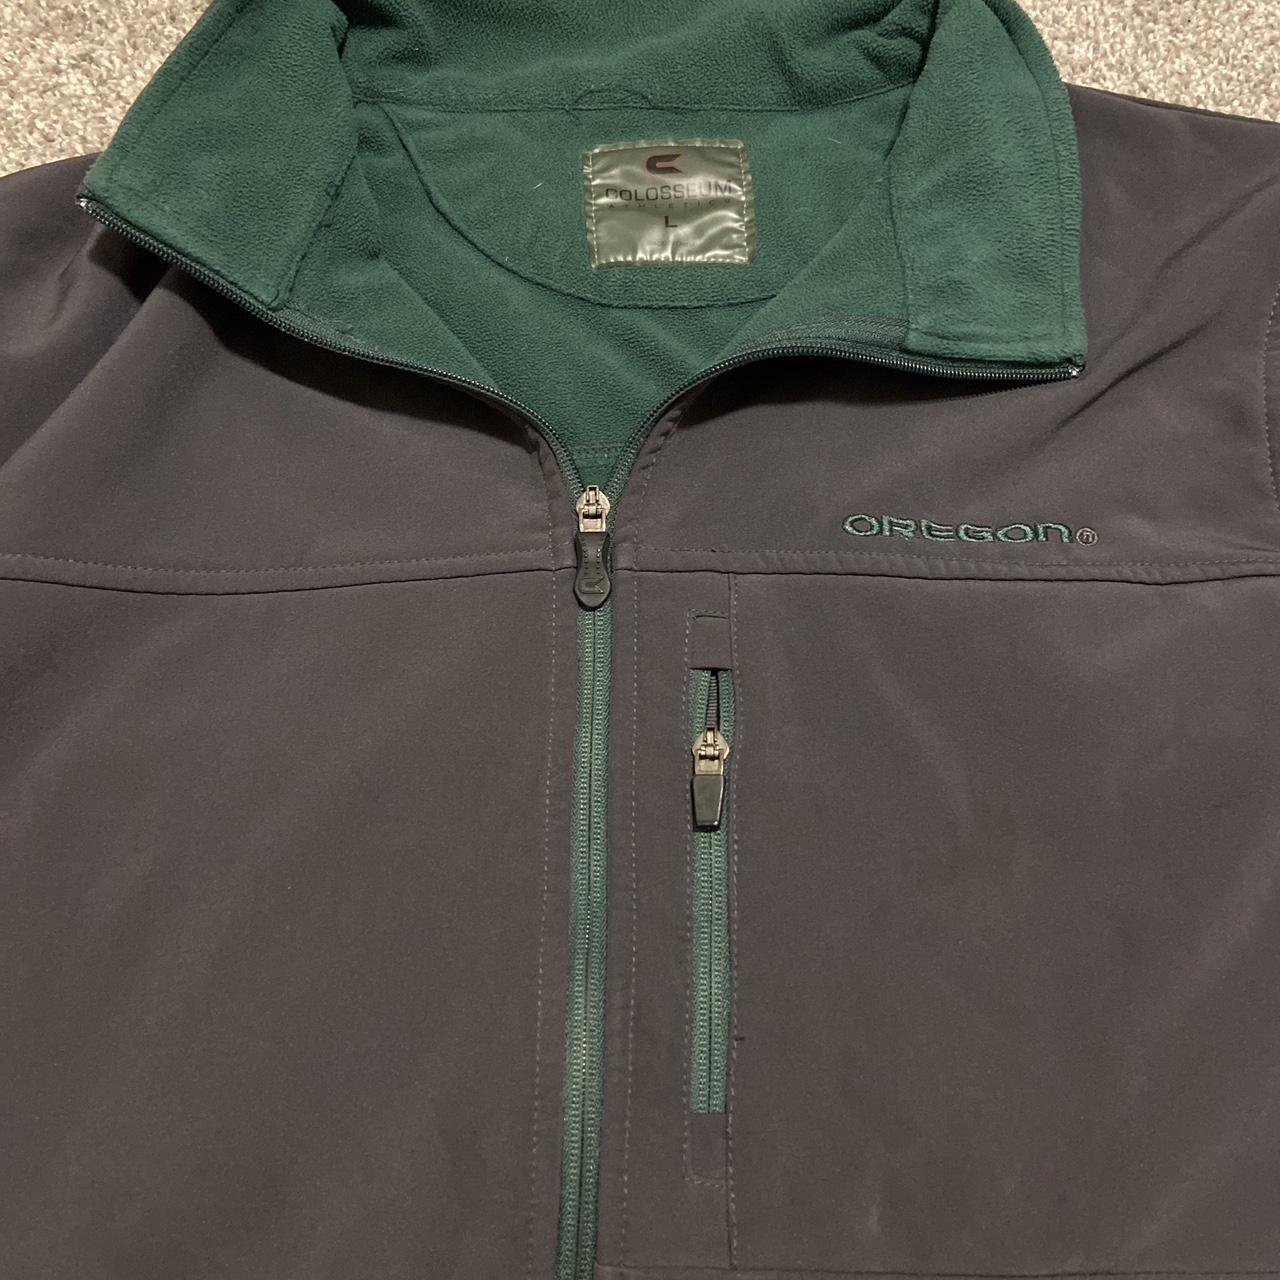 Colosseum Men's Green and Grey Jacket (4)